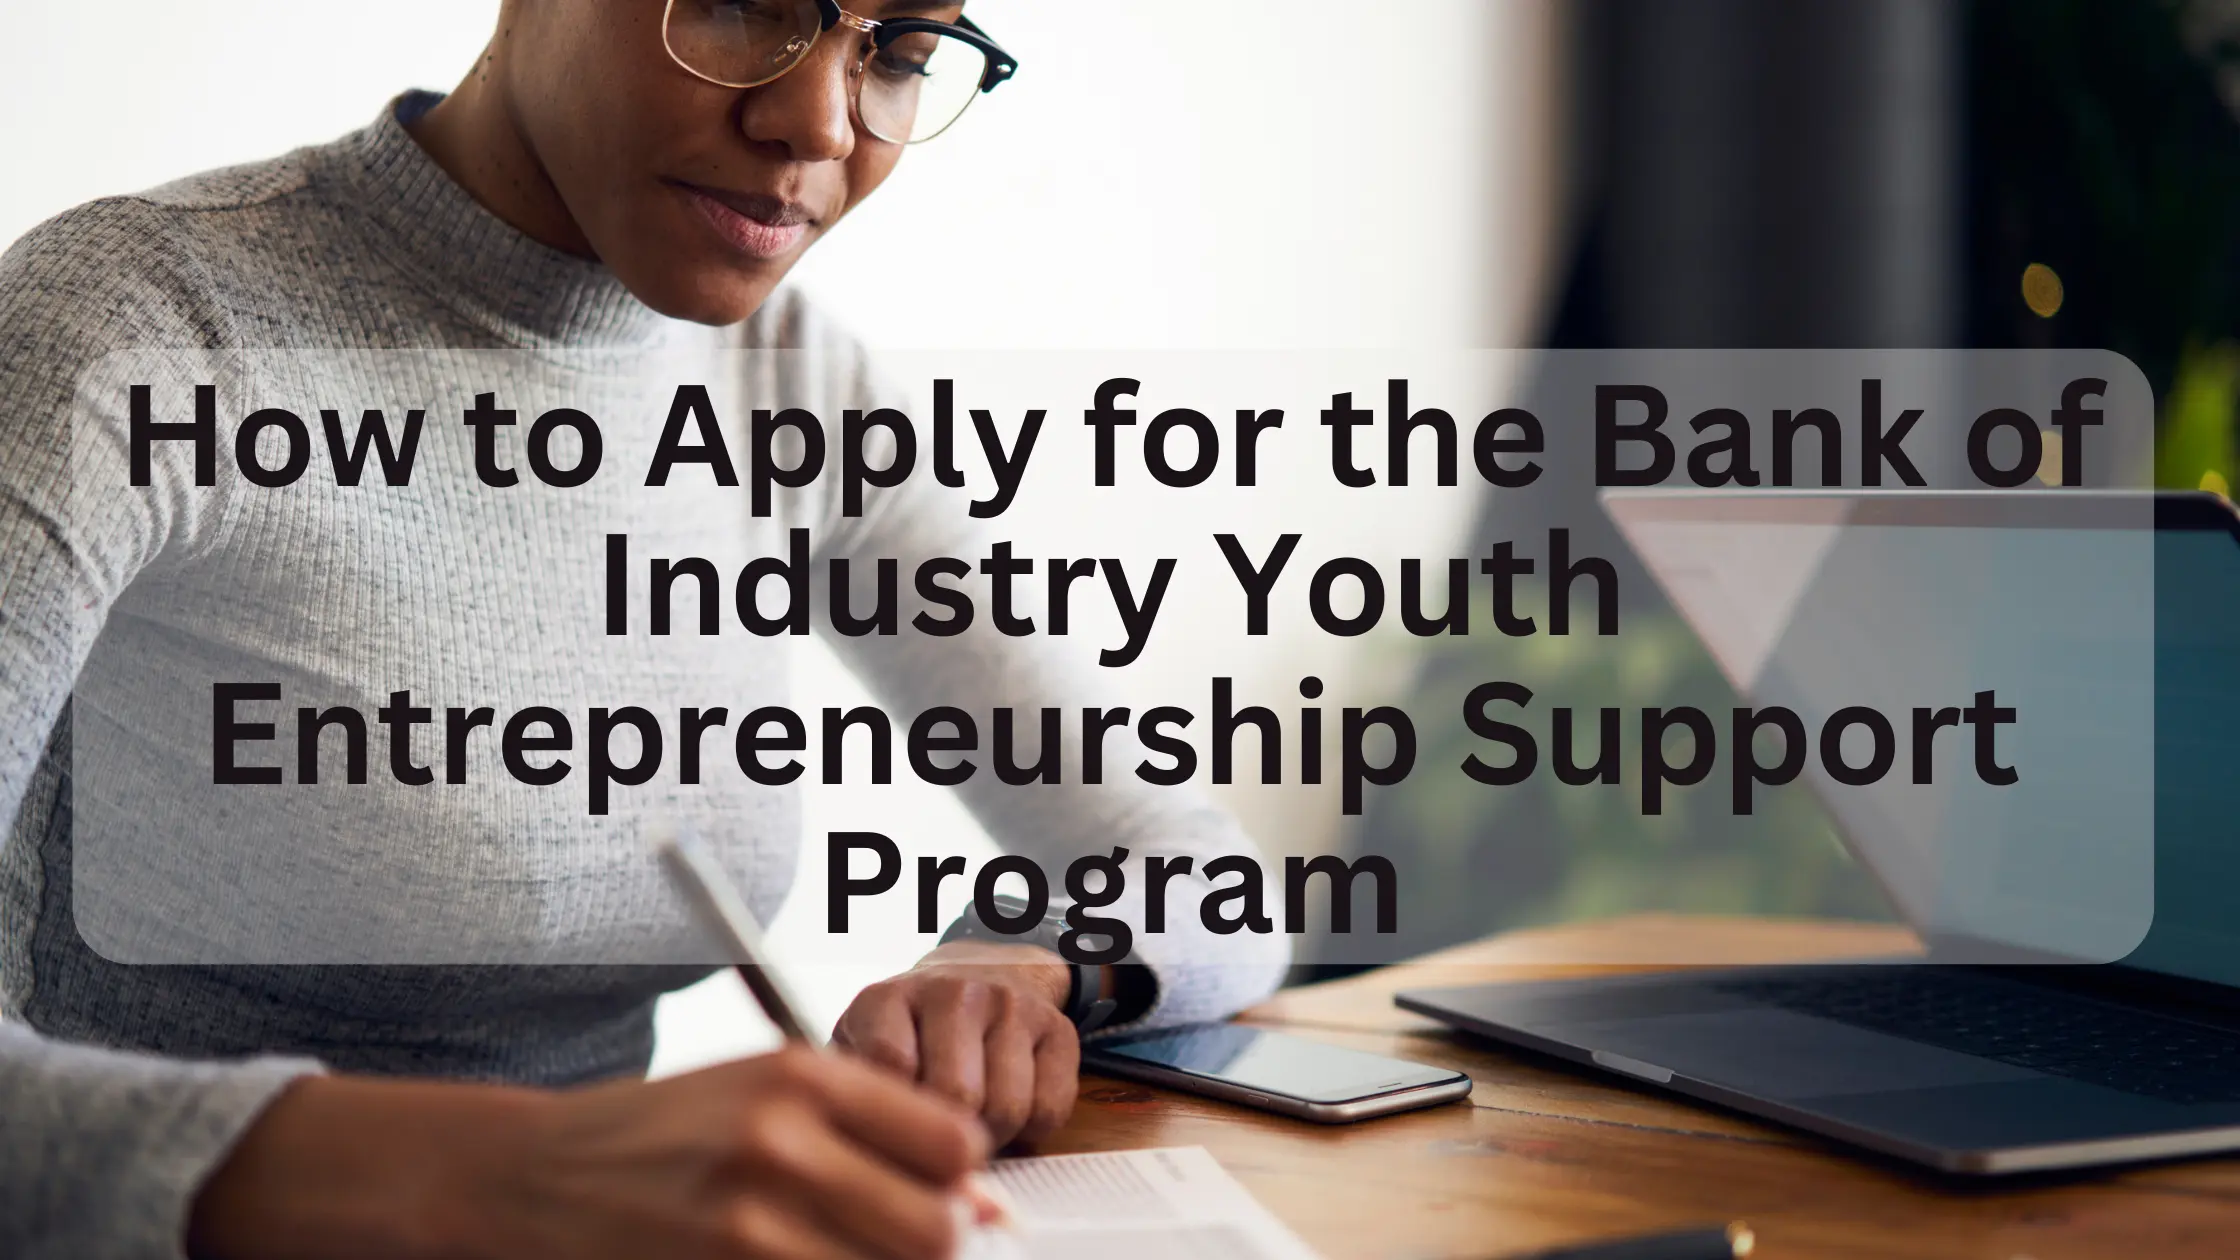 How to Apply for the Bank of Industry Youth Entrepreneurship Support Program